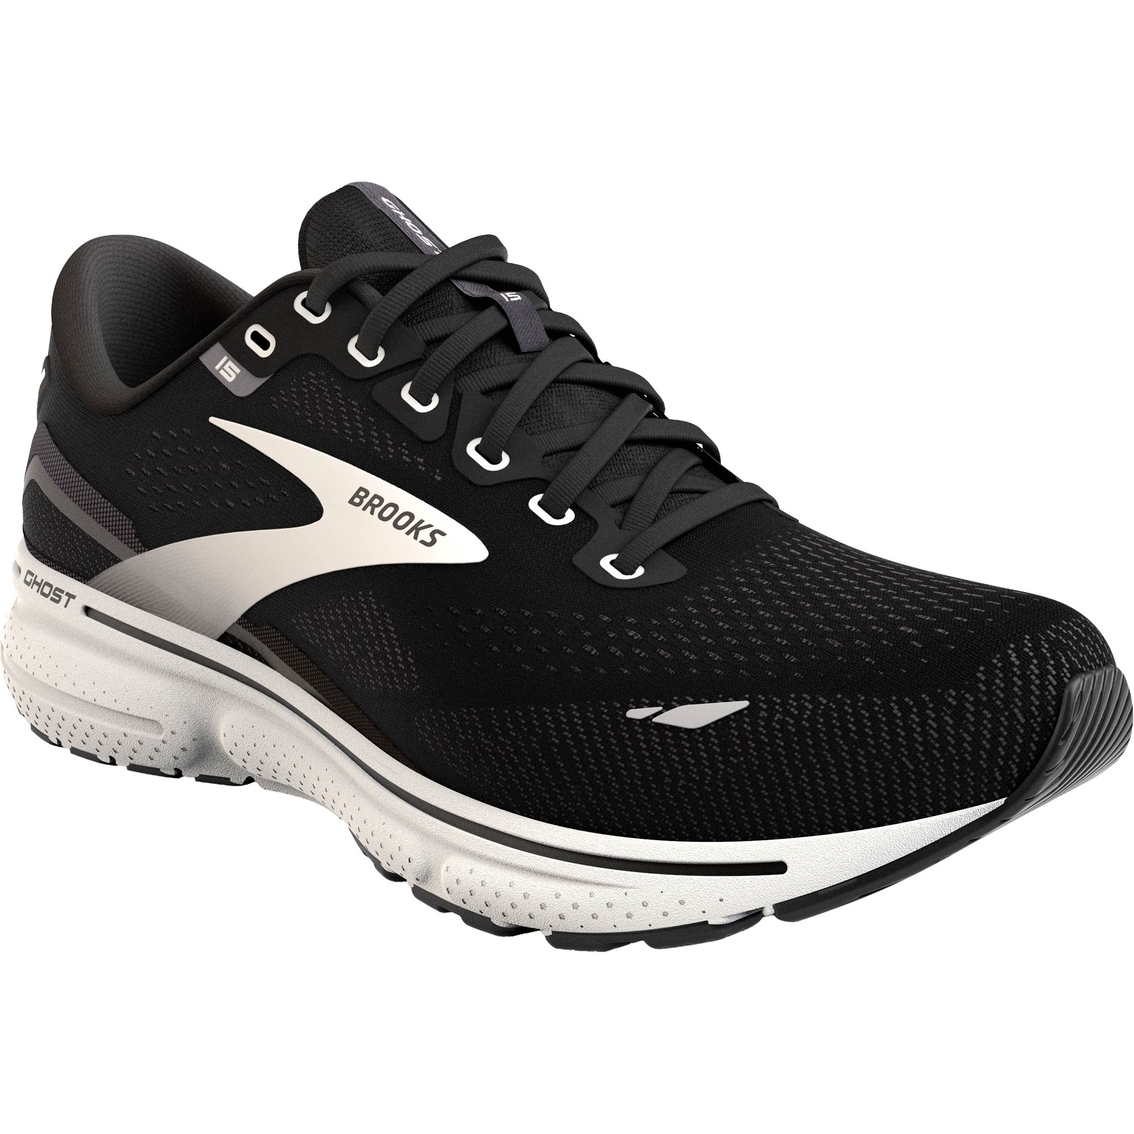 Brooks Ghost 15 Running Shoes | Men's Athletic Shoes | Shoes | Shop The ...